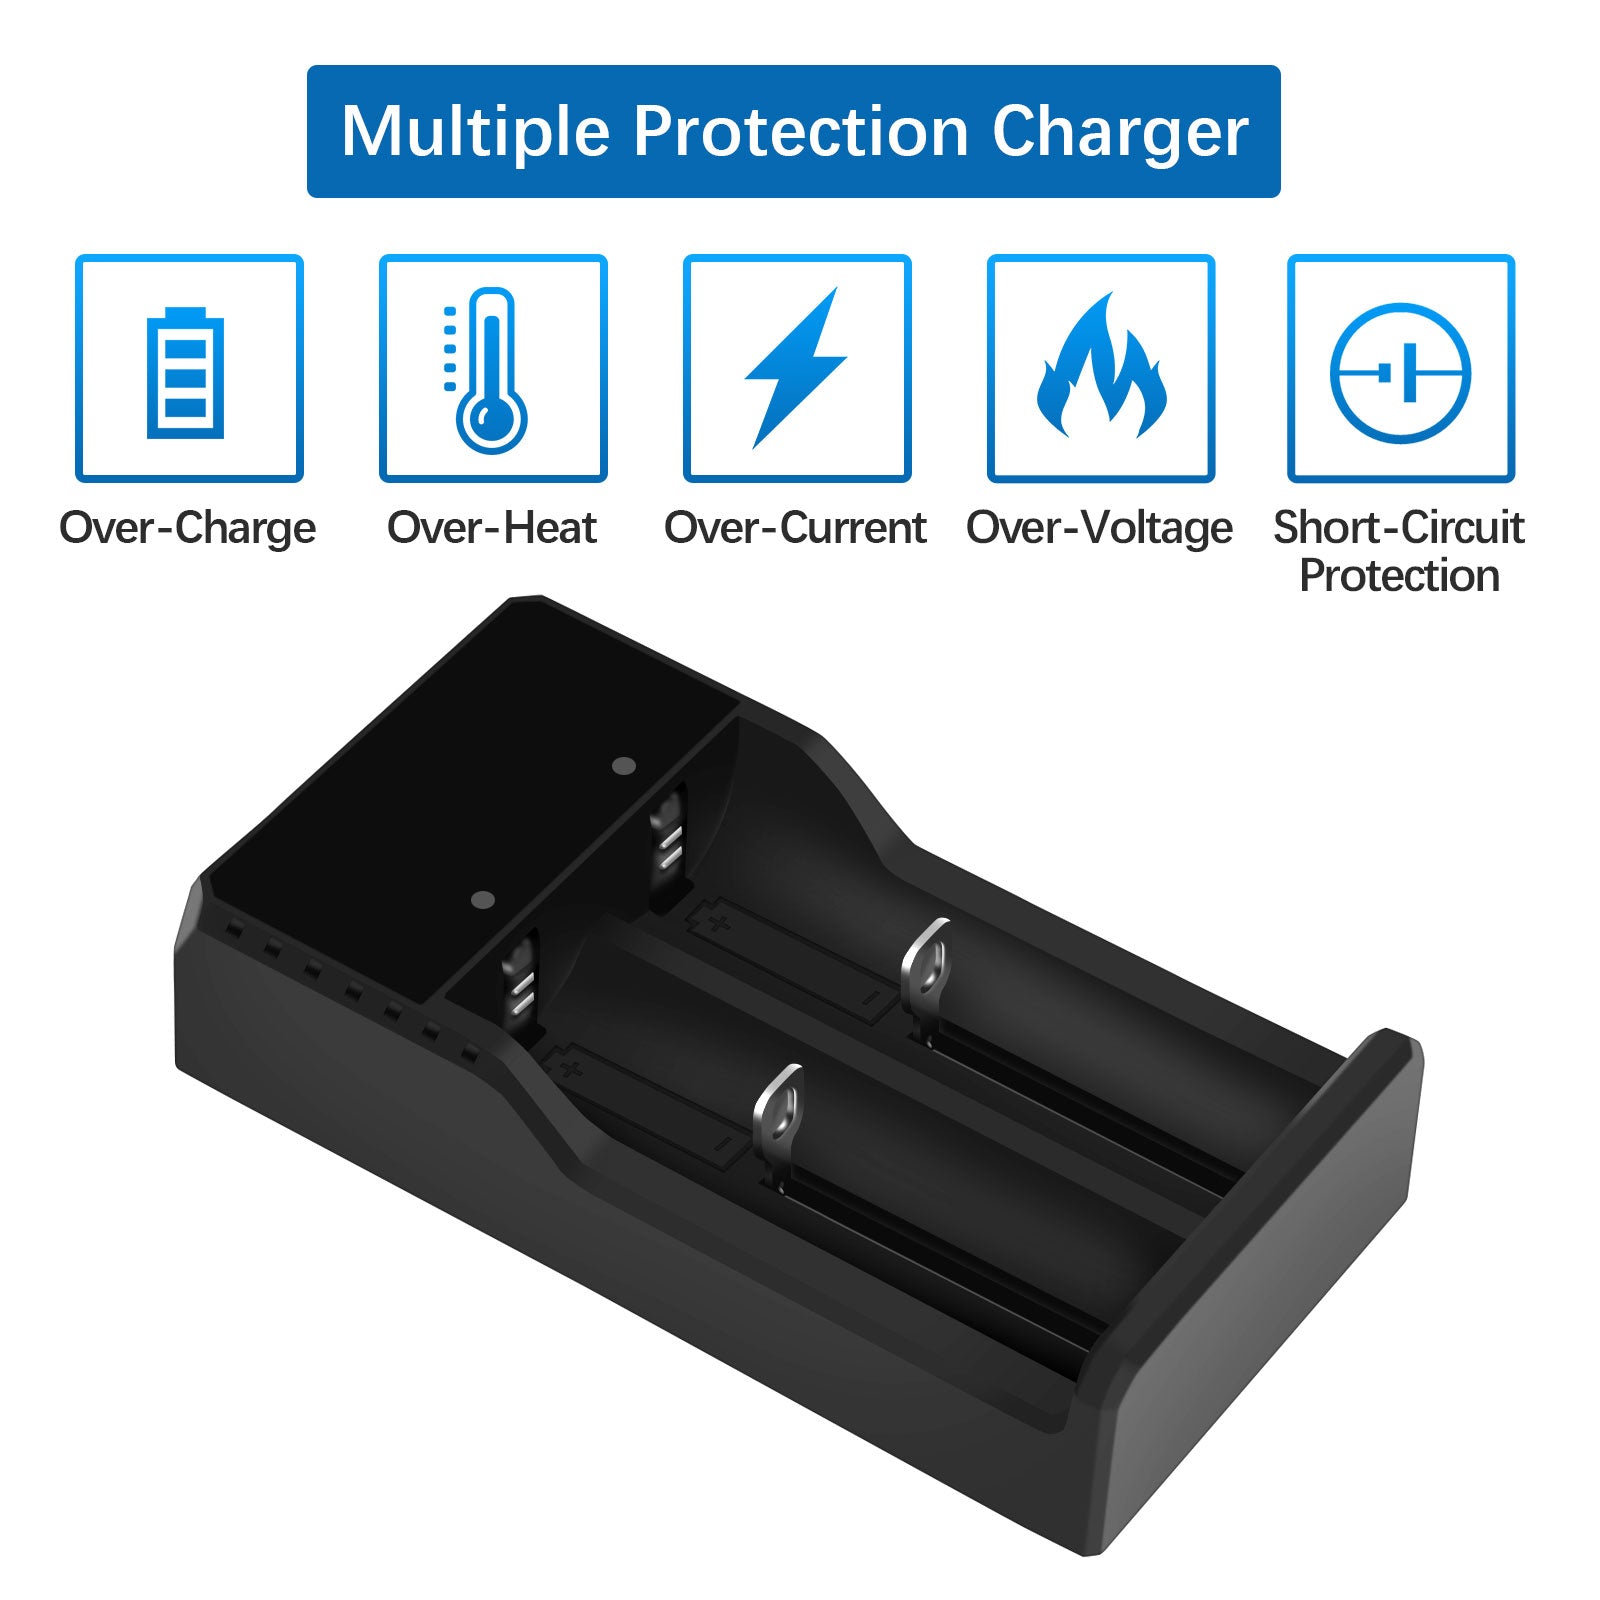 UltraFire Universal Multifunction Battery Charger DX-5 Pro